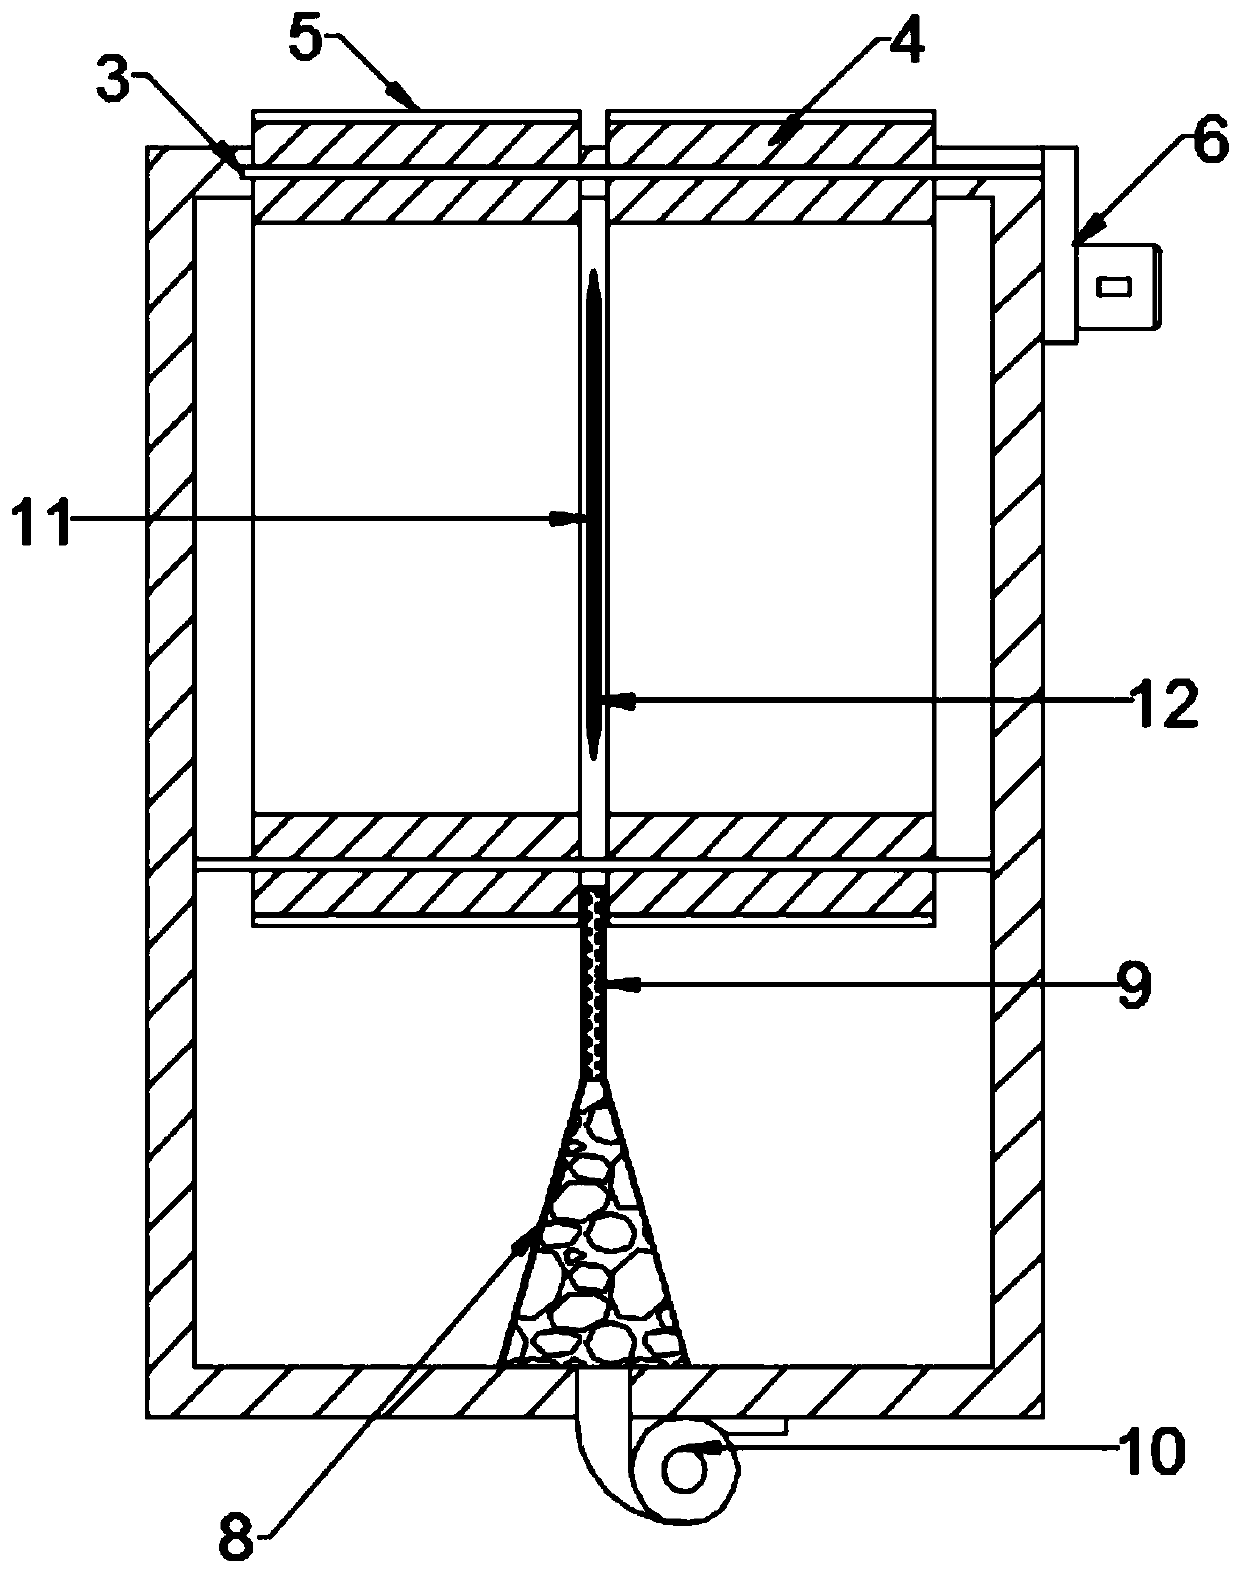 Cutting device and application in wood processing